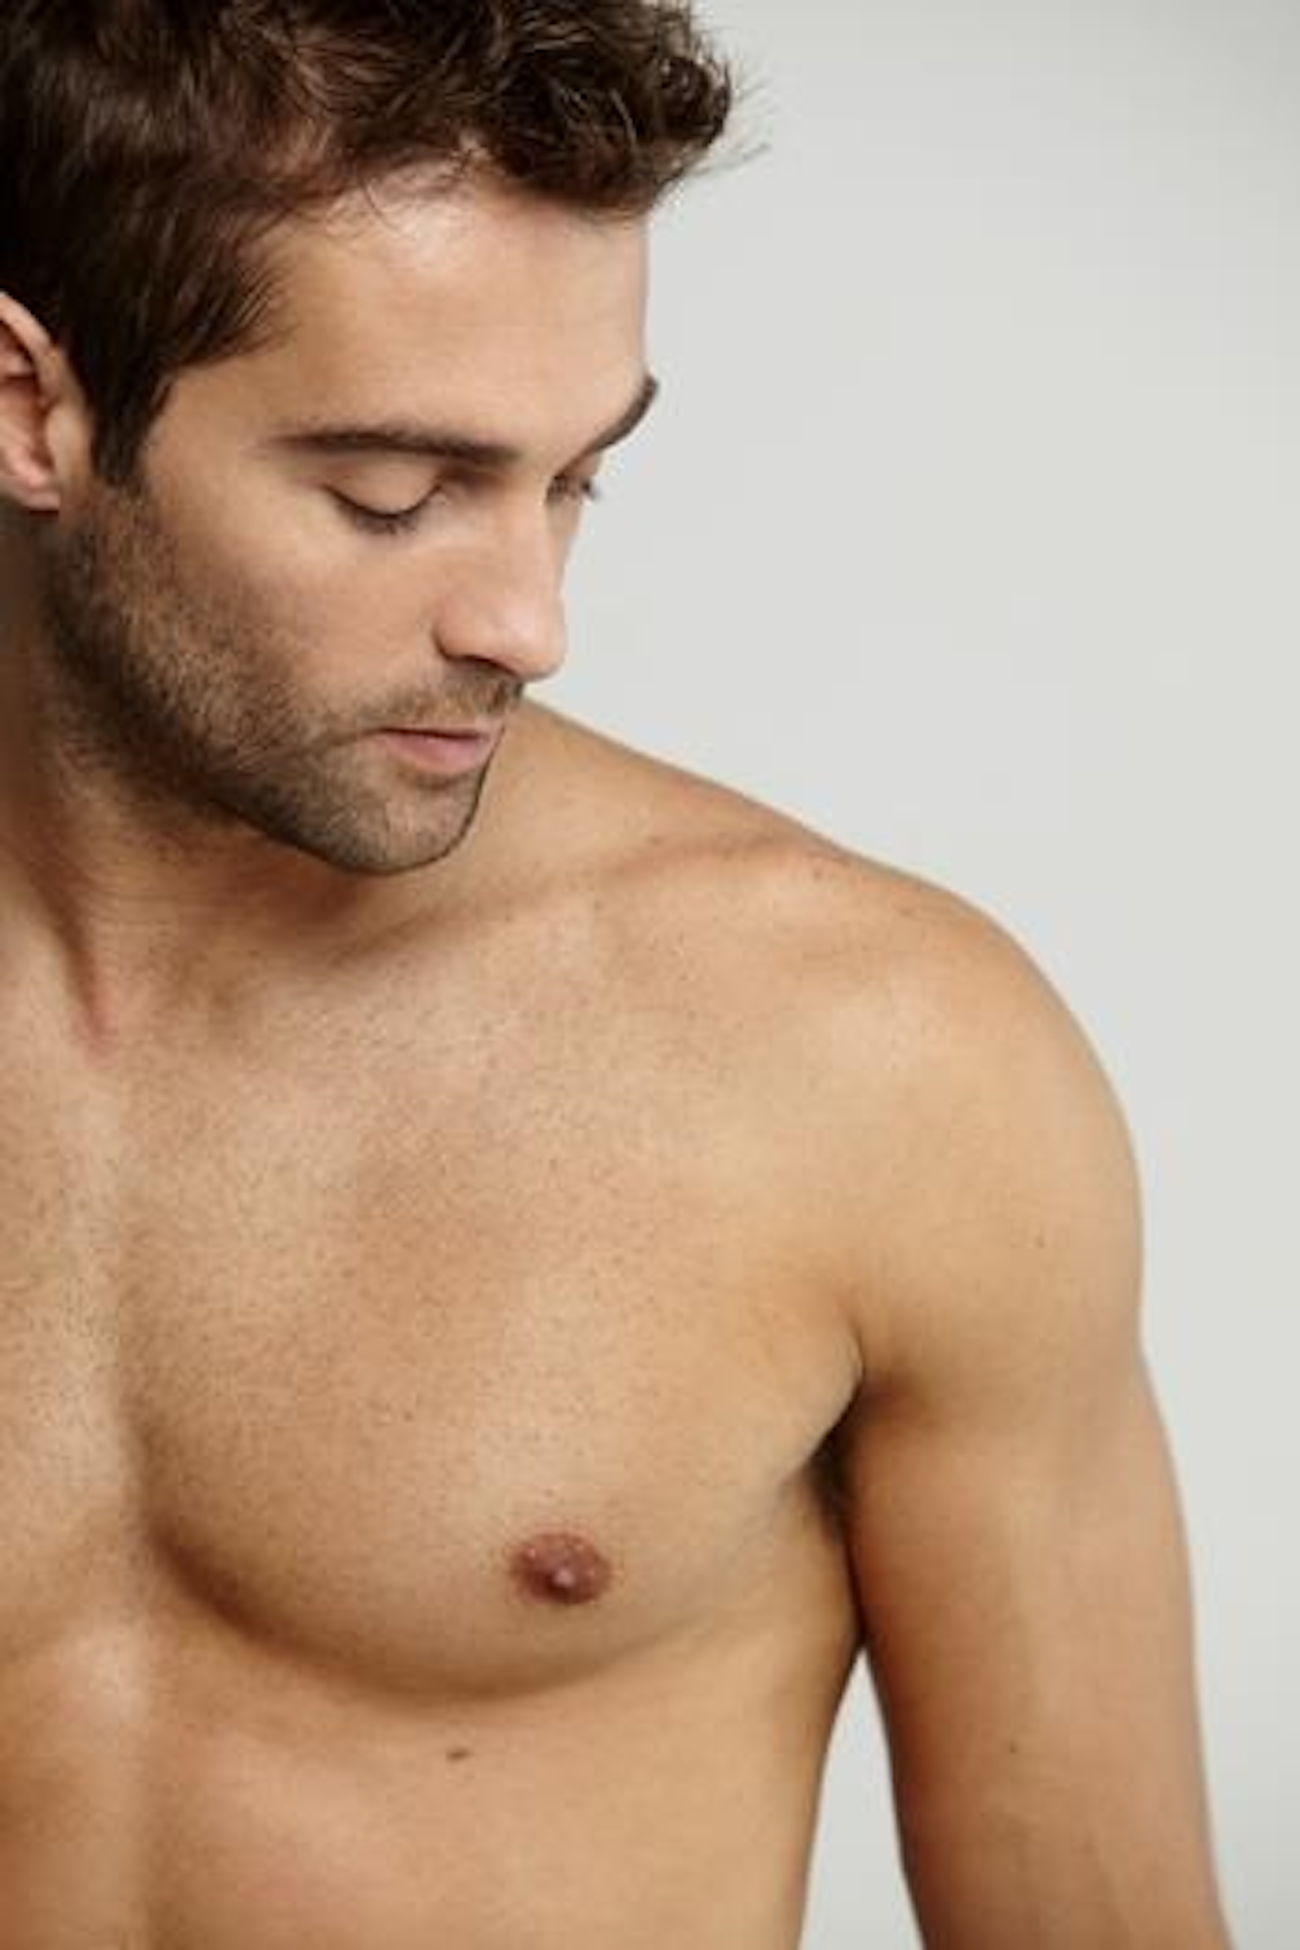 Male breast enlargement uncovered